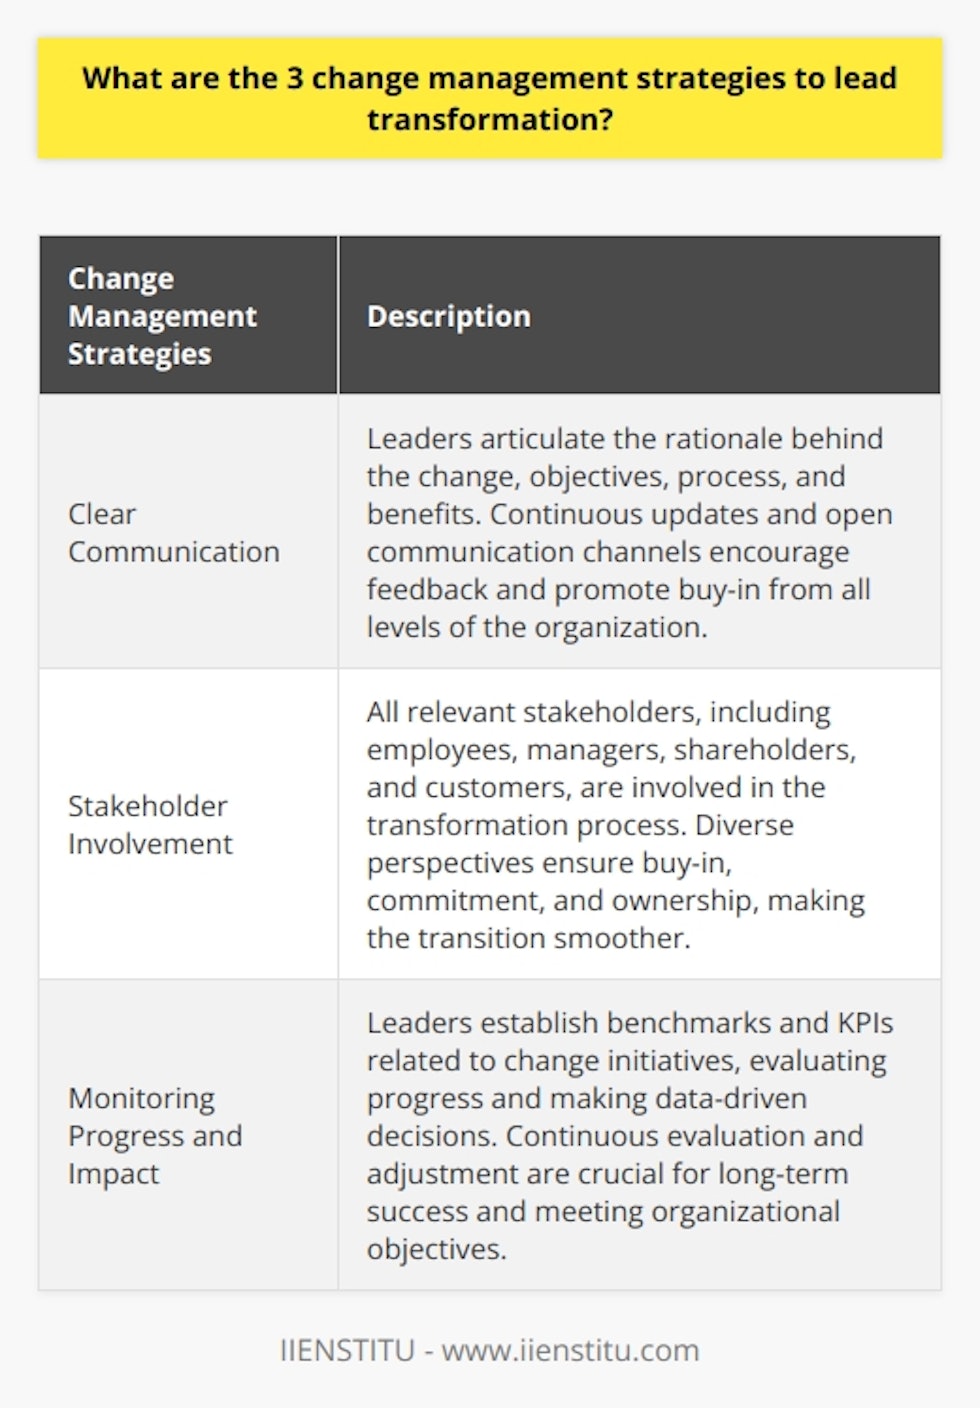 Change management strategies are crucial for leading successful transformations within organizations. By implementing three key strategies – clear communication, stakeholder involvement, and monitoring progress and impact – leaders can navigate the complexities of change and ensure long-term success.Clear communication is essential during the transformation process. Leaders should articulate the rationale behind the change, the objectives, the process, and the benefits. By providing clarity, leaders can alleviate concerns and fears among employees. It is important to continuously update employees on the progress and any adjustments made in response to challenges. Open communication channels also encourage feedback from employees, fostering collaborative problem-solving and promoting buy-in from all levels of the organization.Stakeholder involvement is another critical strategy. All relevant stakeholders, including employees, managers, shareholders, and customers, should be involved in the transformation process. By considering diverse perspectives and ensuring buy-in, leaders can increase commitment to the change and make the transition smoother. Opportunities for stakeholder input and participation should be provided to foster a sense of ownership and engagement.Monitoring progress and impact is vital for assessing the effectiveness of the transformation and making necessary adjustments. Leaders should establish benchmarks and key performance indicators (KPIs) related to the change initiatives. By evaluating progress and making data-driven decisions, leaders can ensure that the organization is on track to meet its objectives. Continuous evaluation and adjustment are crucial for long-term success.In conclusion, clear communication, stakeholder involvement, and monitoring progress and impact are three essential change management strategies. By employing these strategies, leaders can guide their organizations through transformations successfully. These strategies enable organizations to navigate the challenges of change effectively and emerge stronger and better prepared for future success.